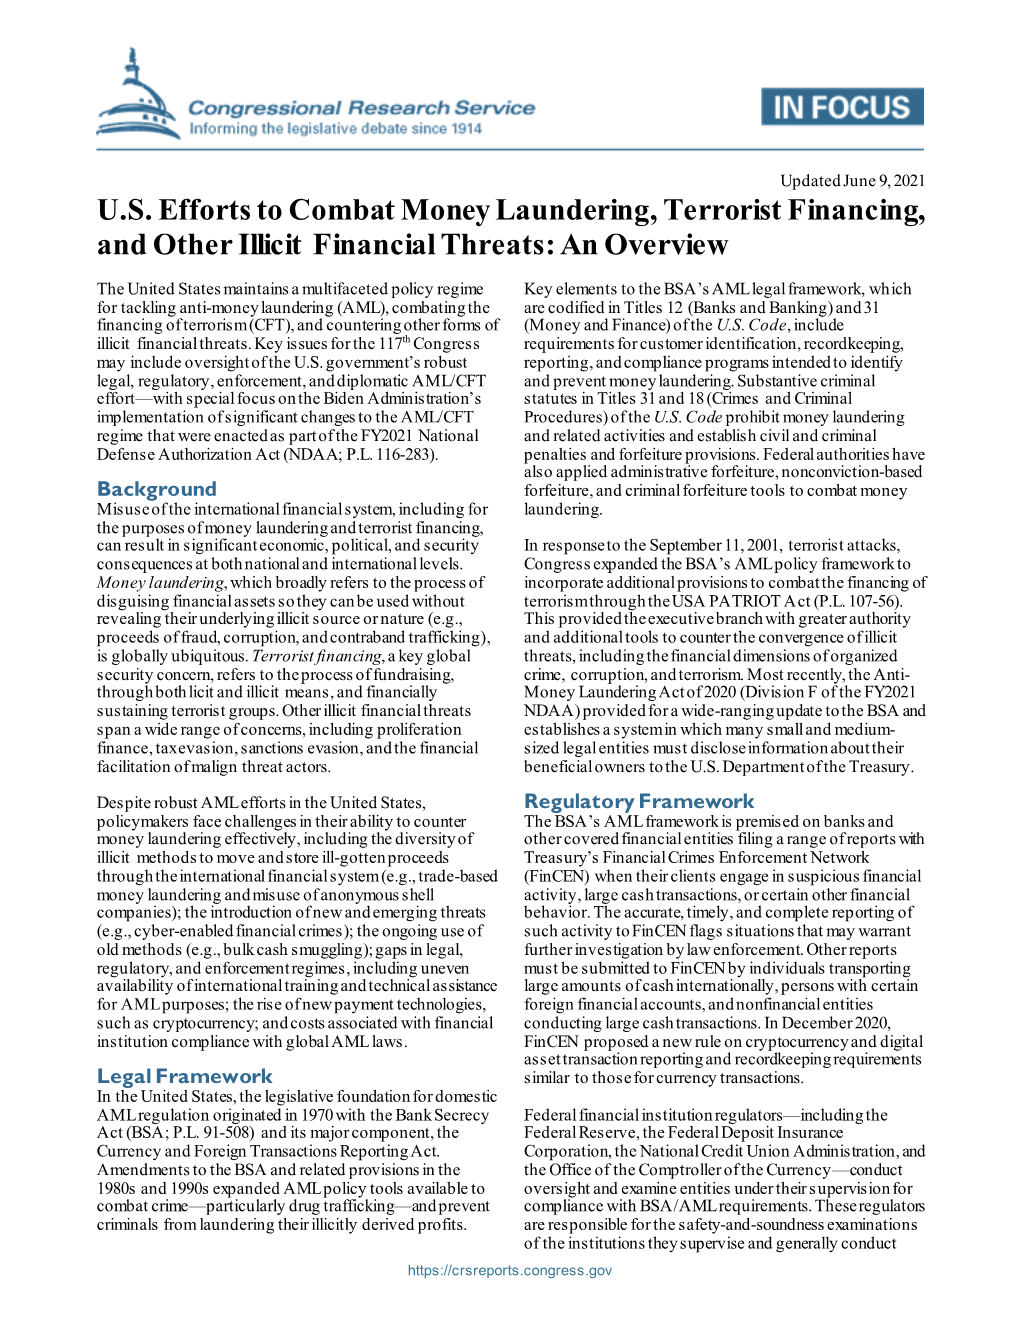 U.S. Efforts to Combat Money Laundering, Terrorist Financing, and Other Illicit Financial Threats: an Overview